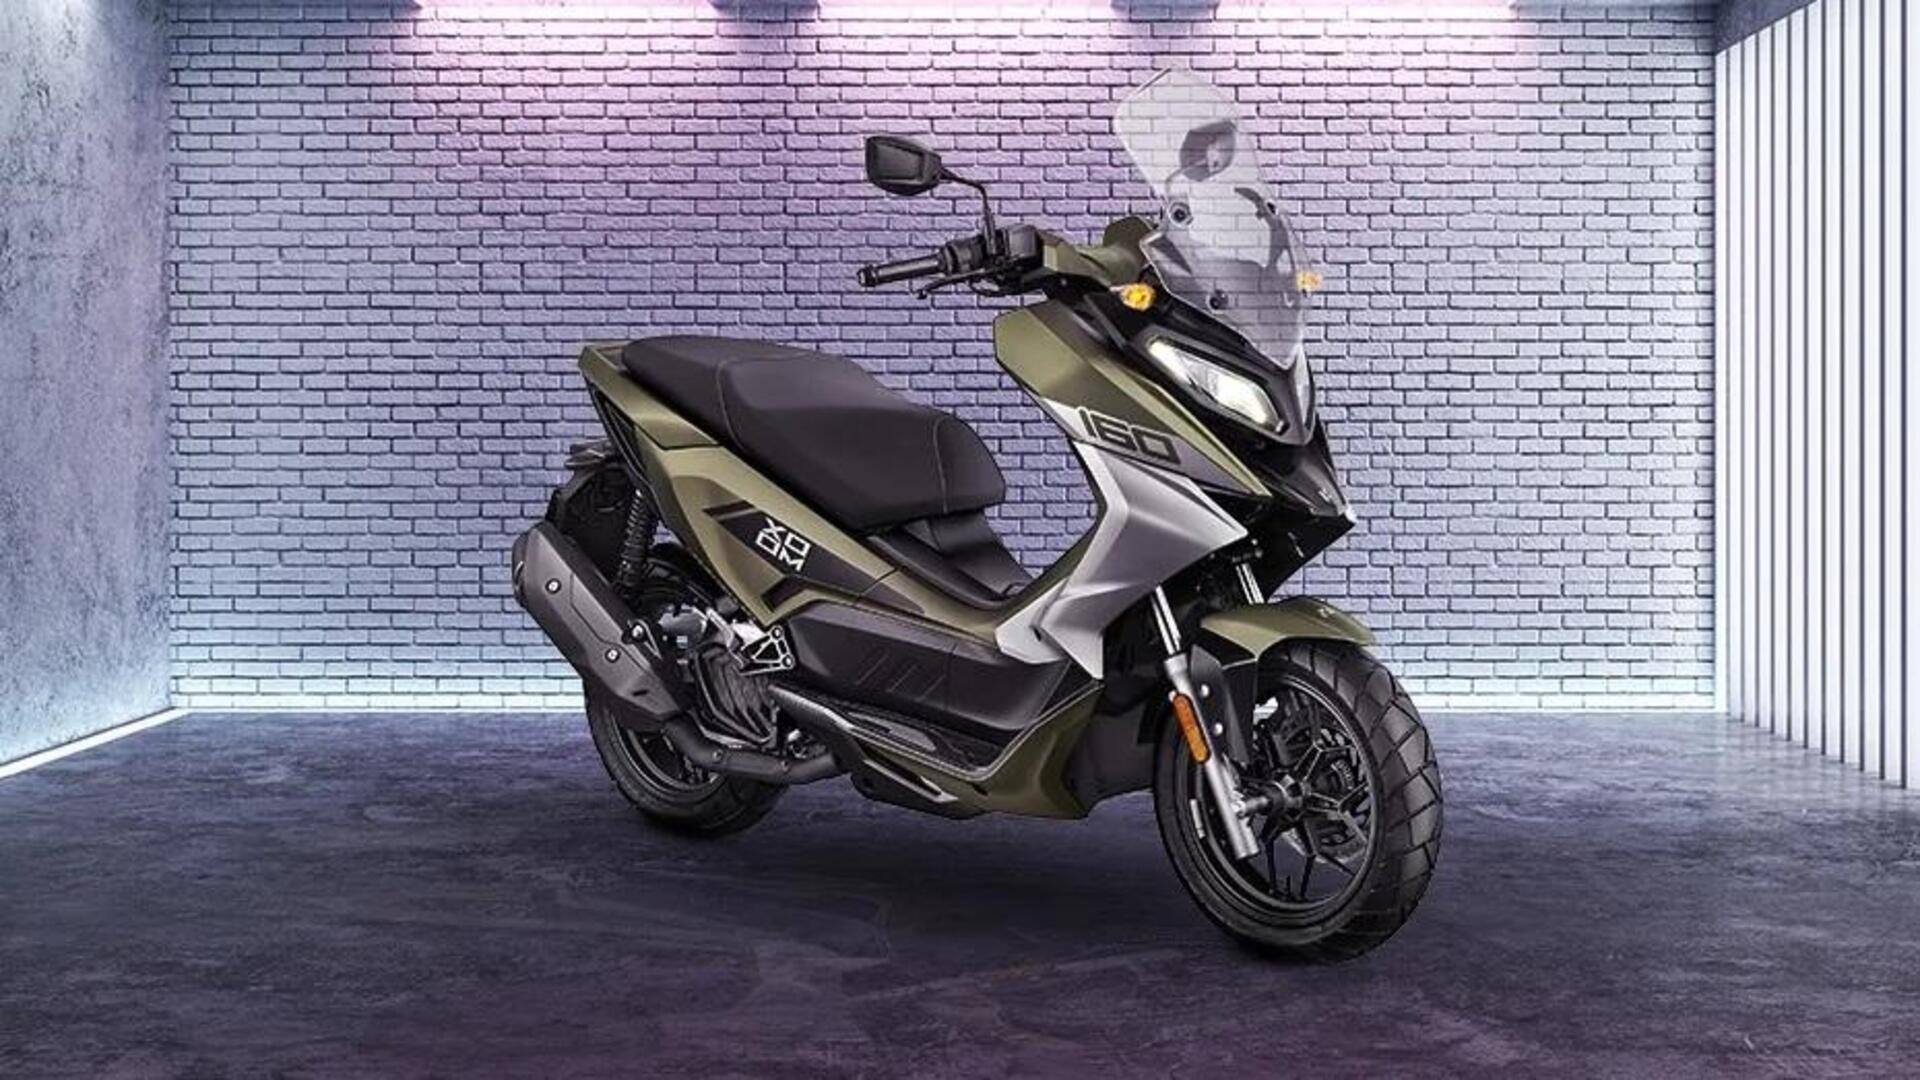 Hero MotoCorp to launch Xoom 160 soon: What to expect